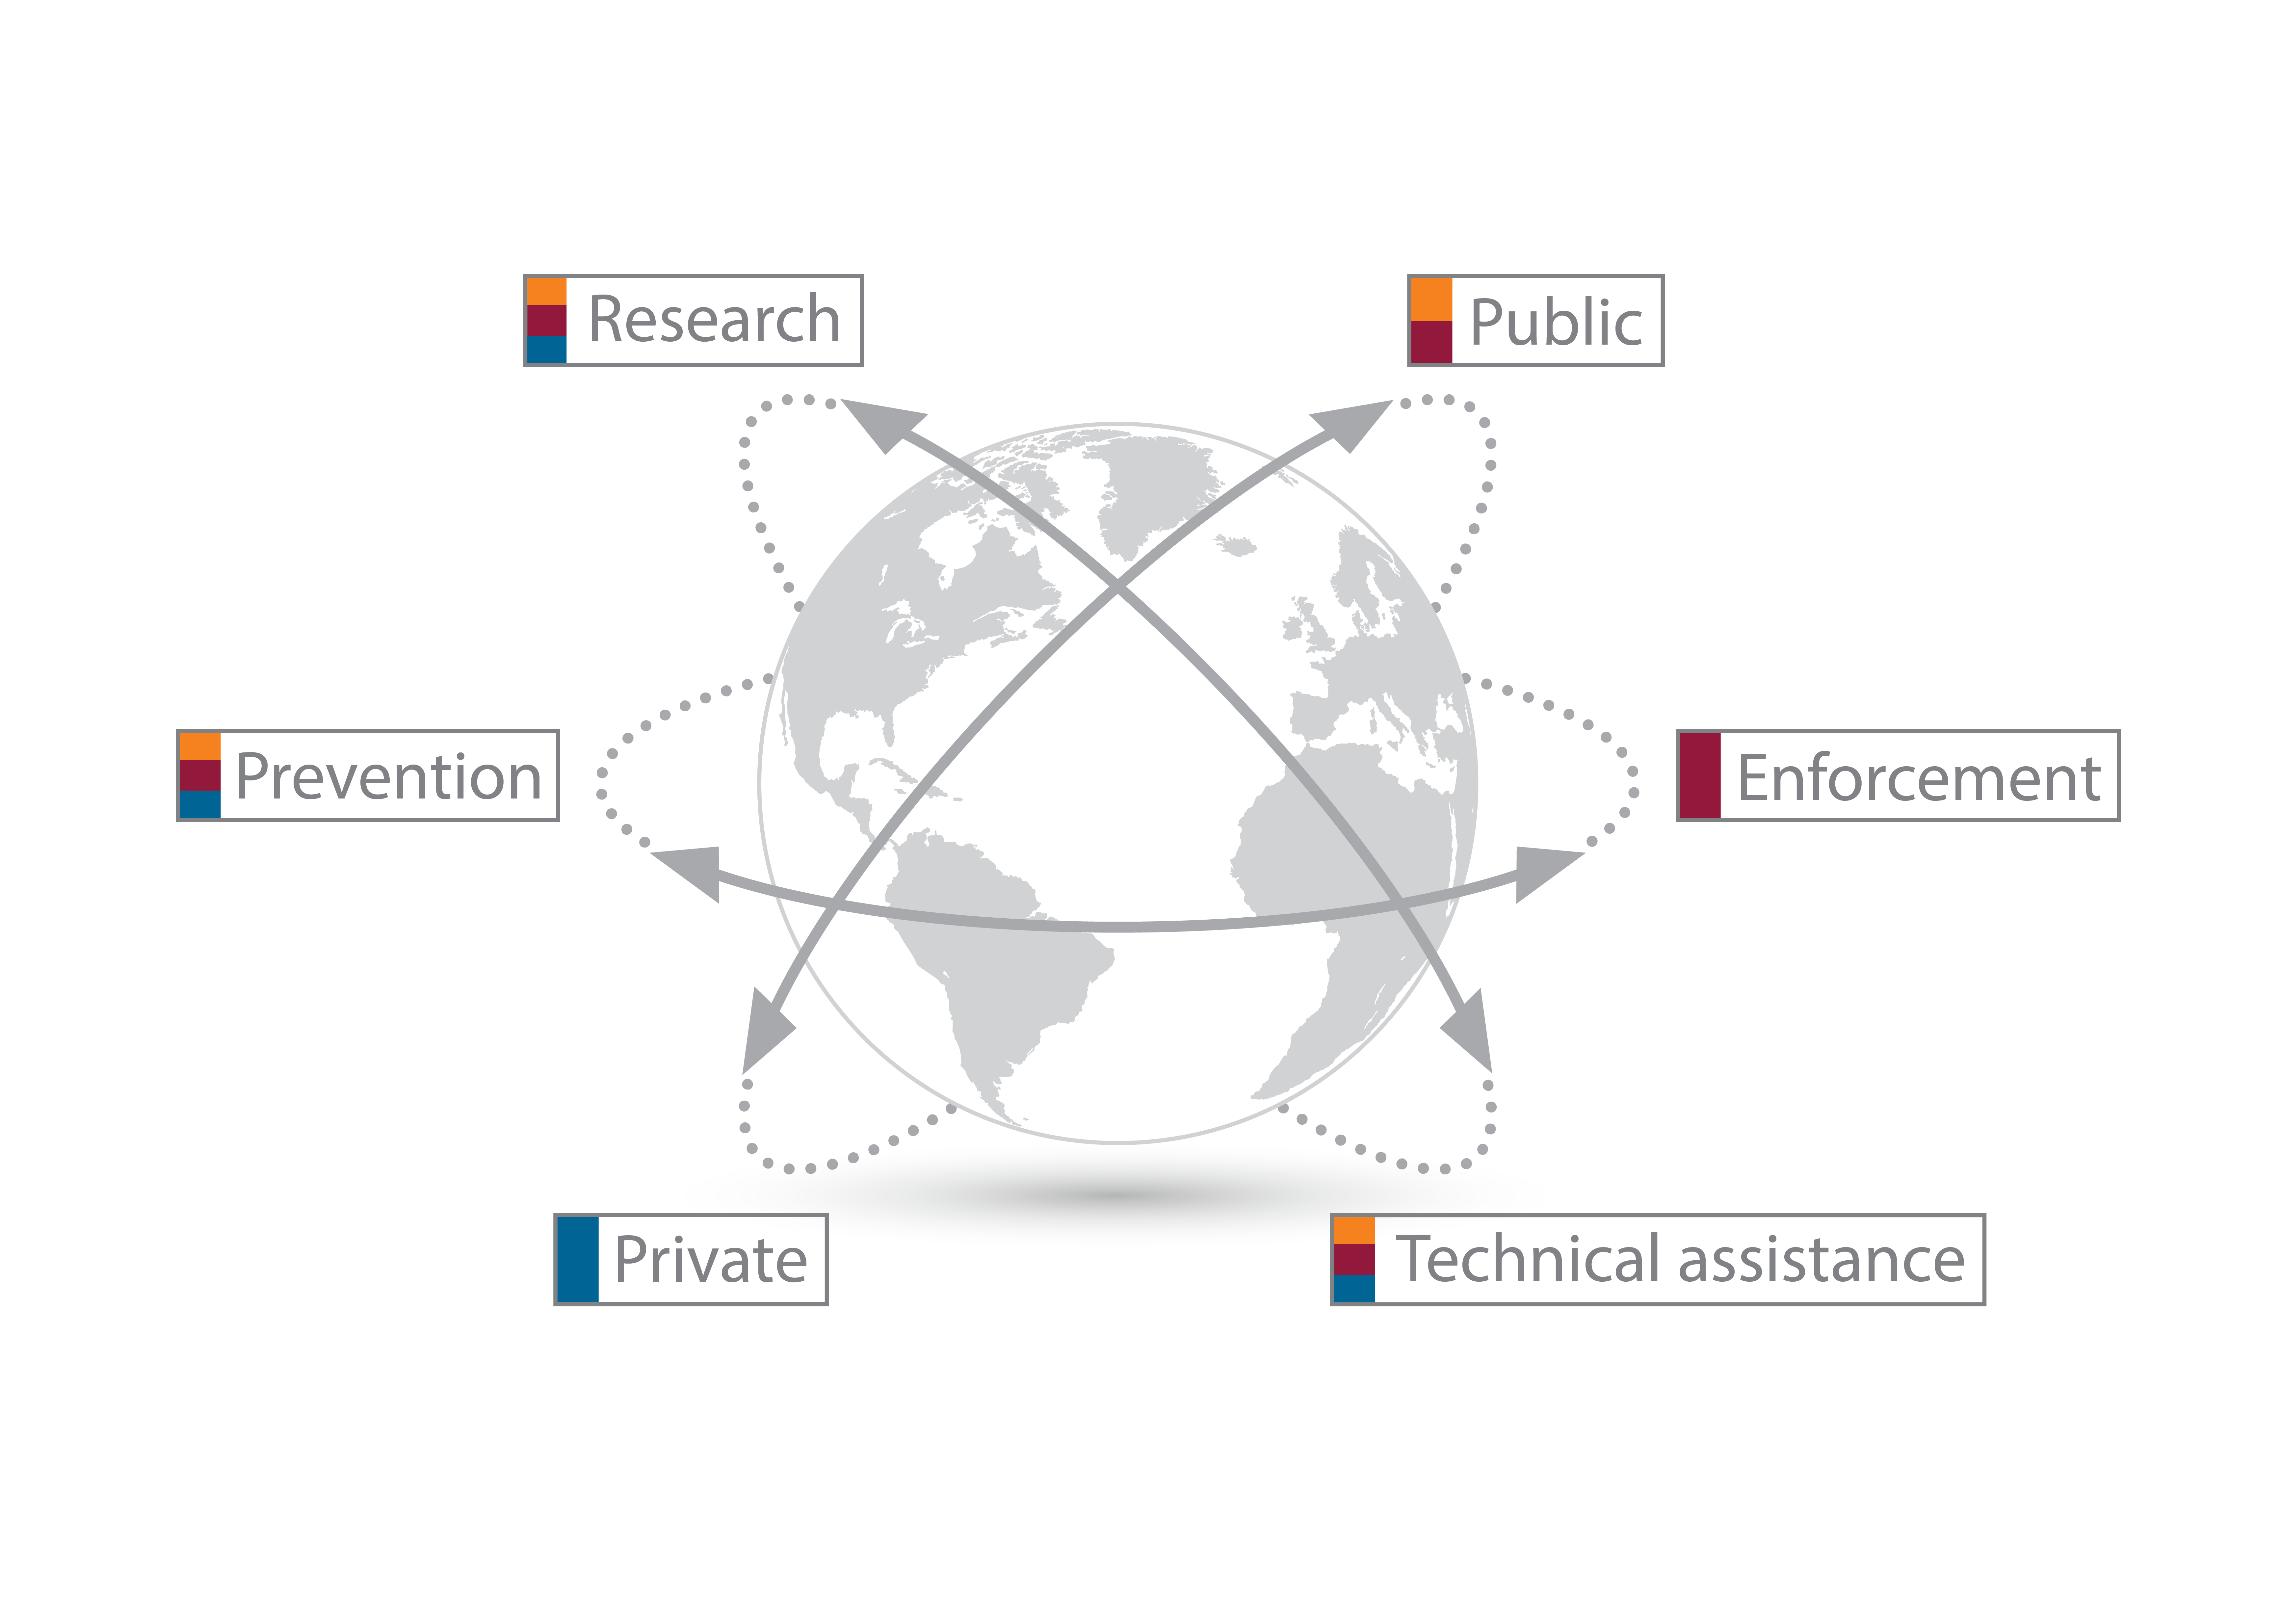 Holistic globe showing areas of expertise